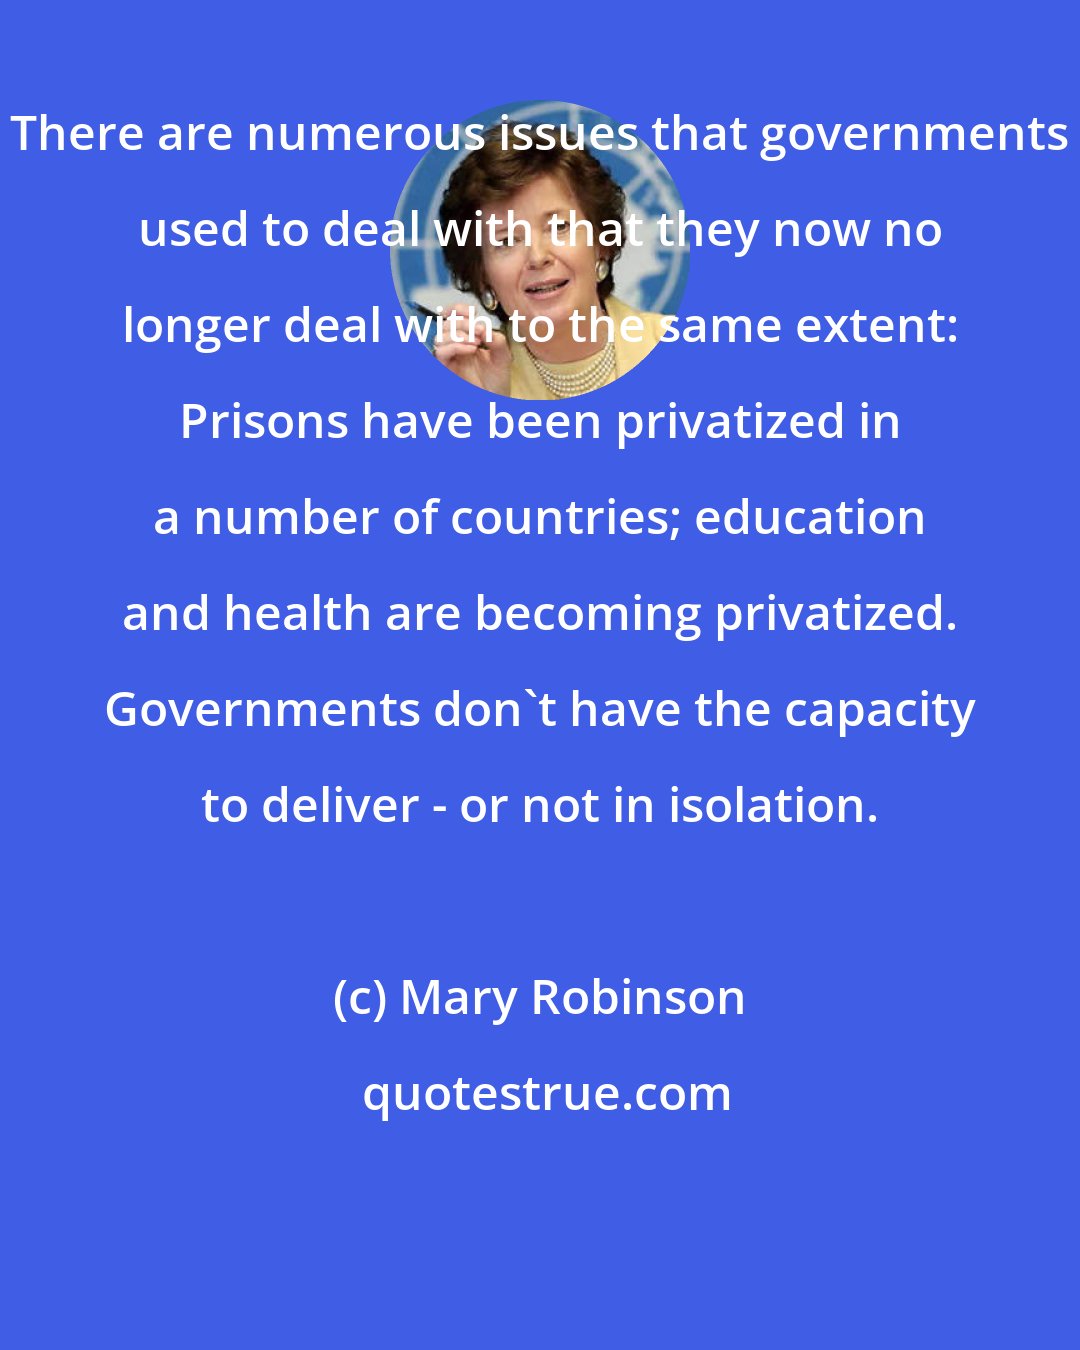 Mary Robinson: There are numerous issues that governments used to deal with that they now no longer deal with to the same extent: Prisons have been privatized in a number of countries; education and health are becoming privatized. Governments don't have the capacity to deliver - or not in isolation.